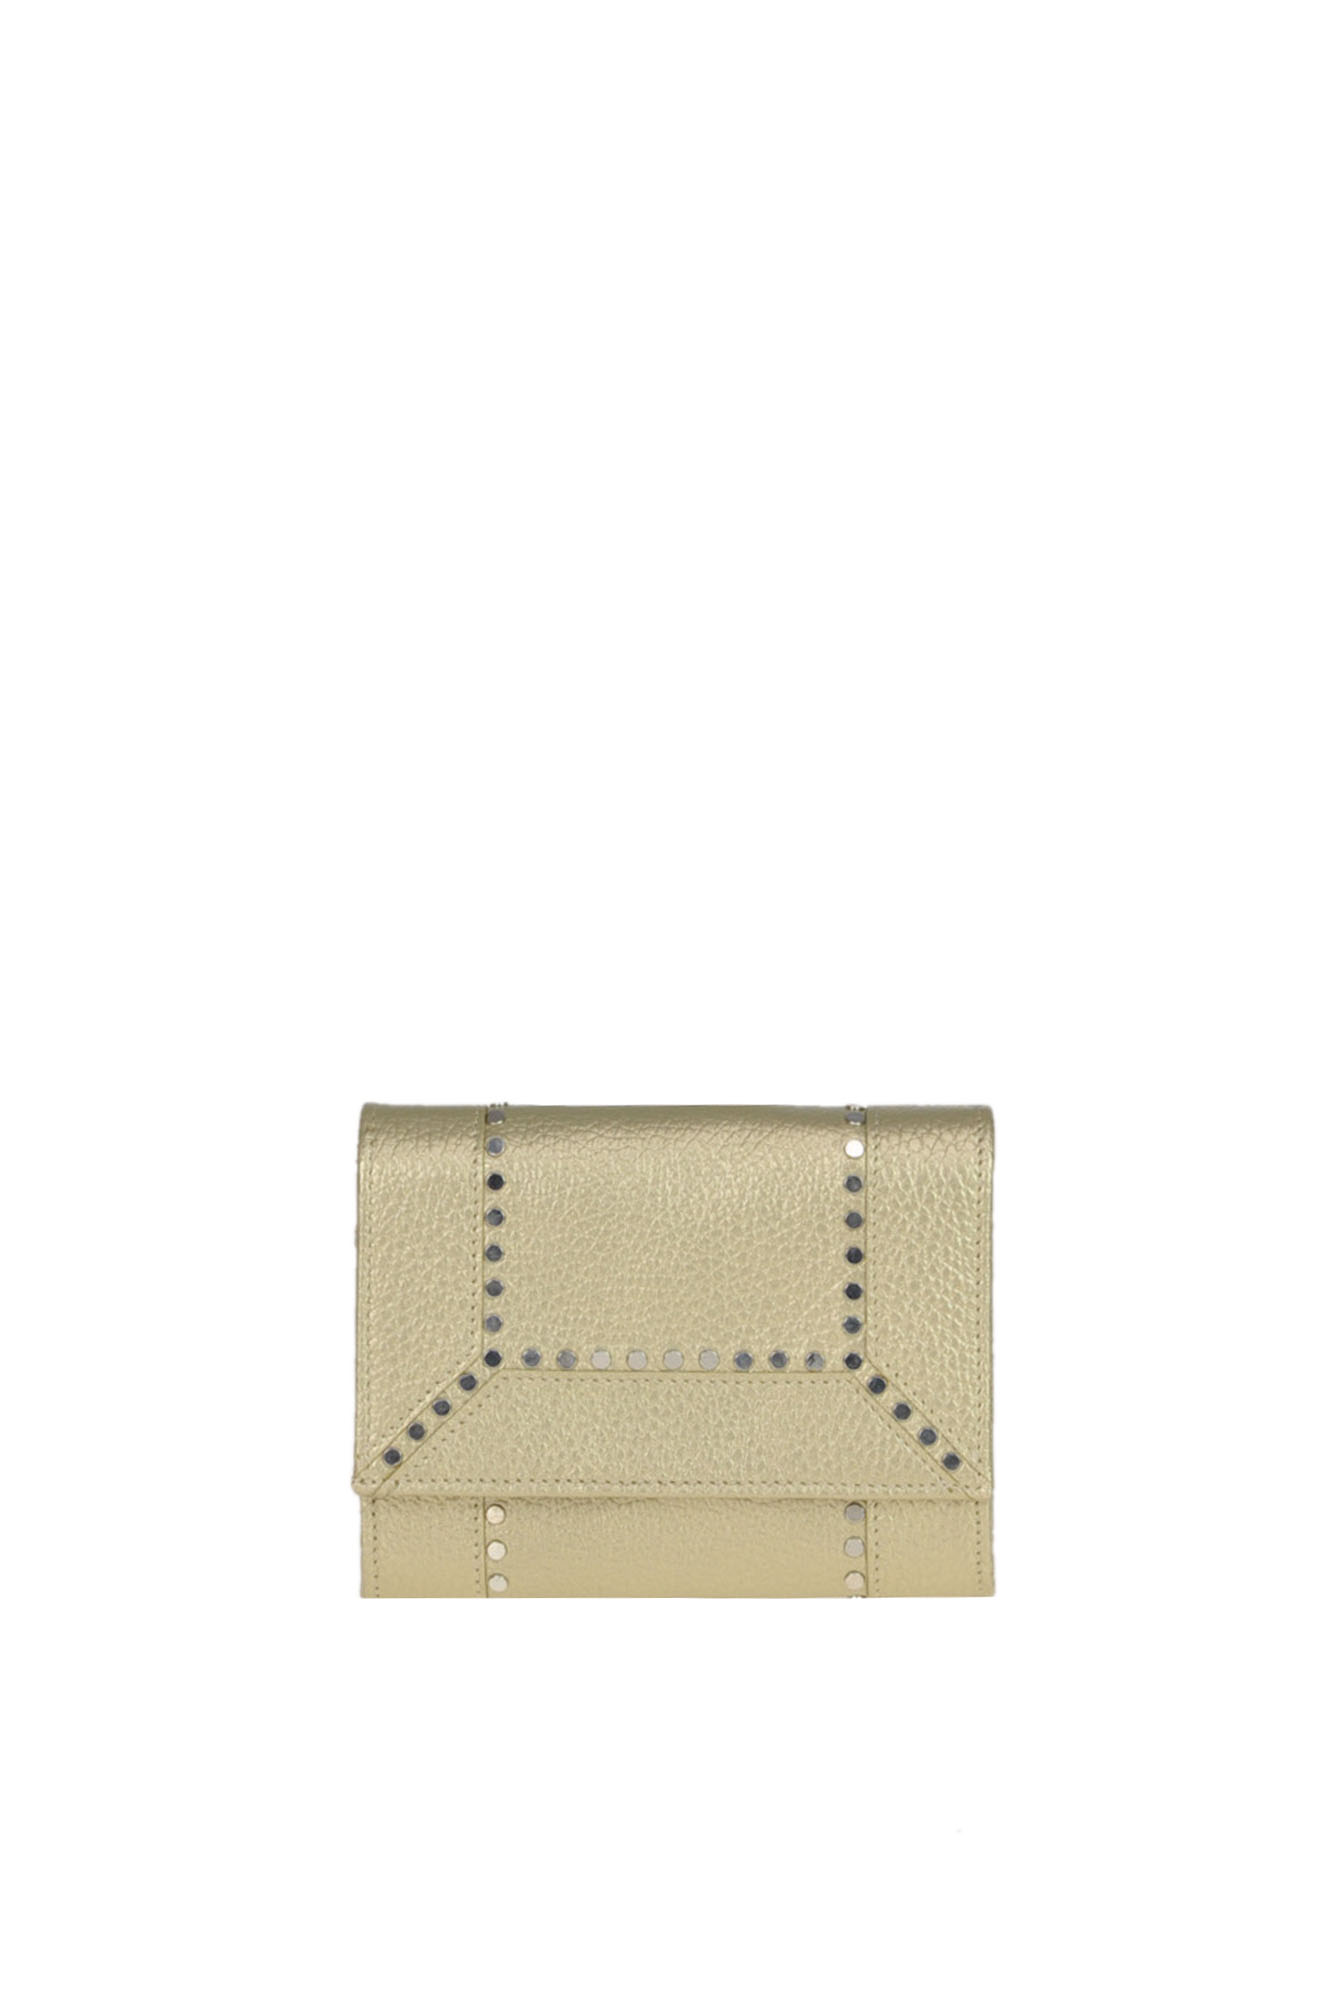 ORCIANI STUDDED LEATHER WALLET